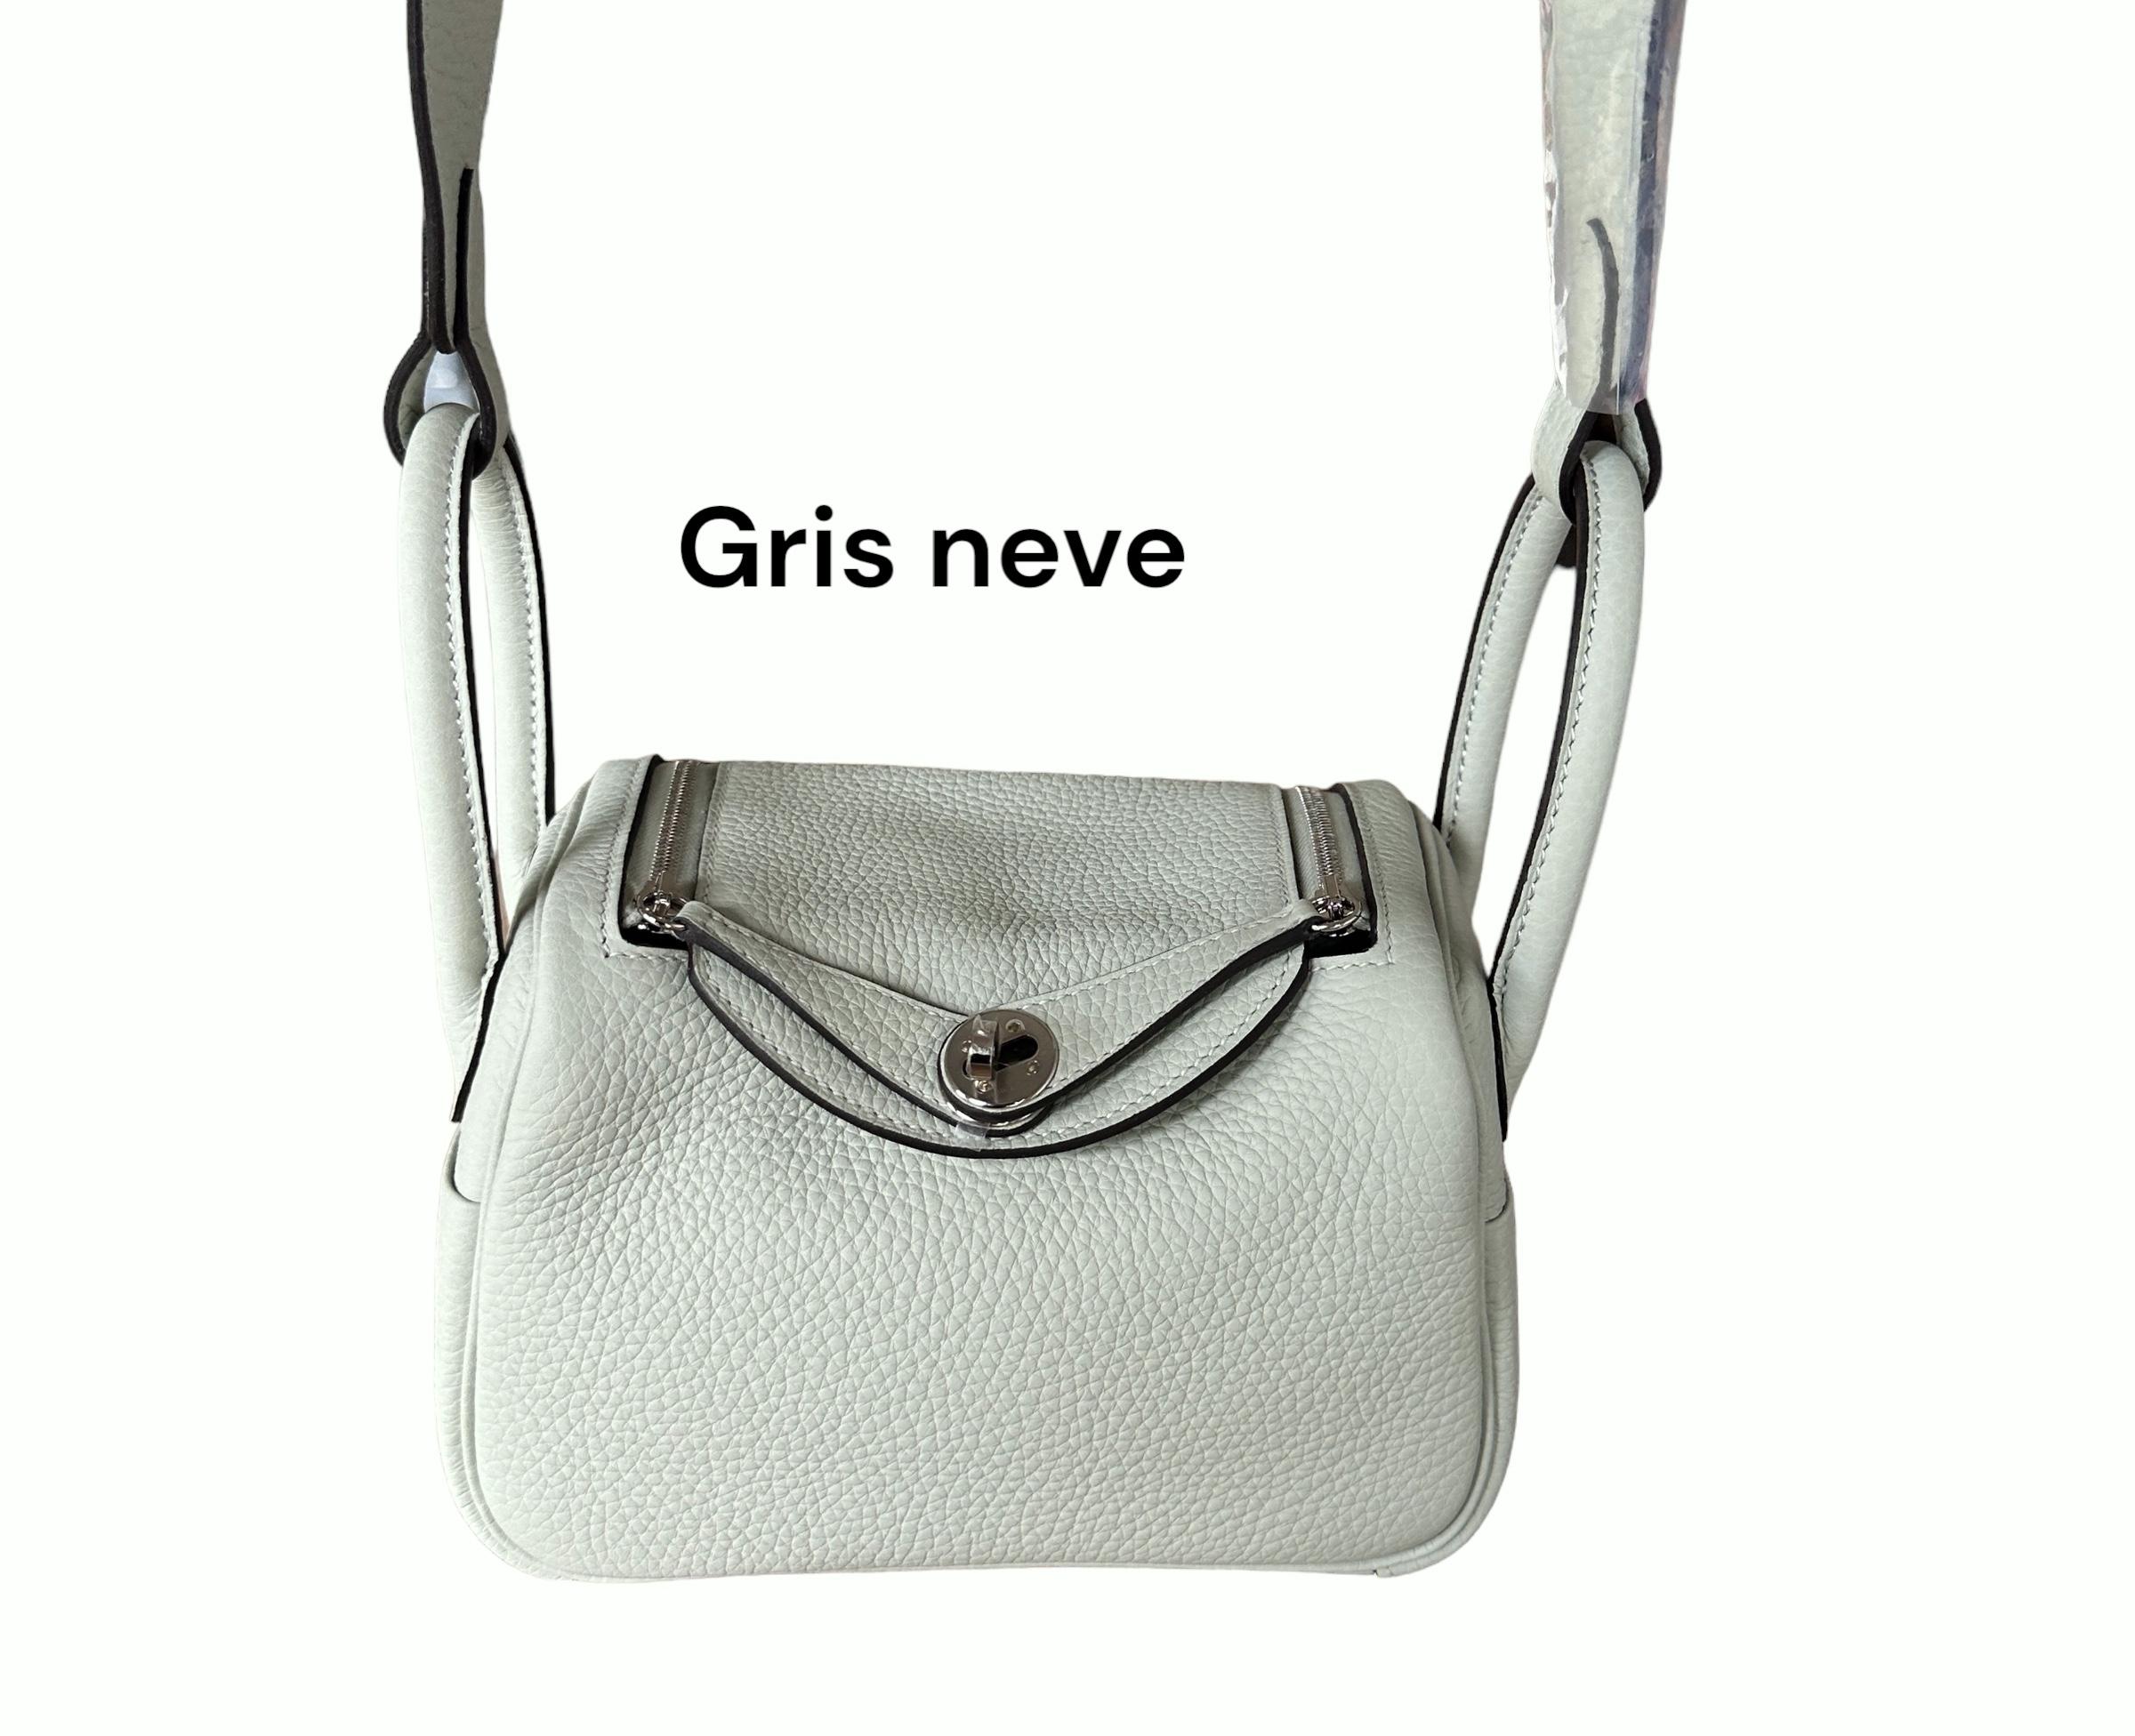 Hermes Lindy Bag
The New Size
The Mini
Crossbody
Color: Gris Neve
Palladium-plated Hardware
The Hermes Mini Lindy is a smaller version of the classic Lindy bag, which is a popular style of handbag from the brand. The Mini Lindy has the same features